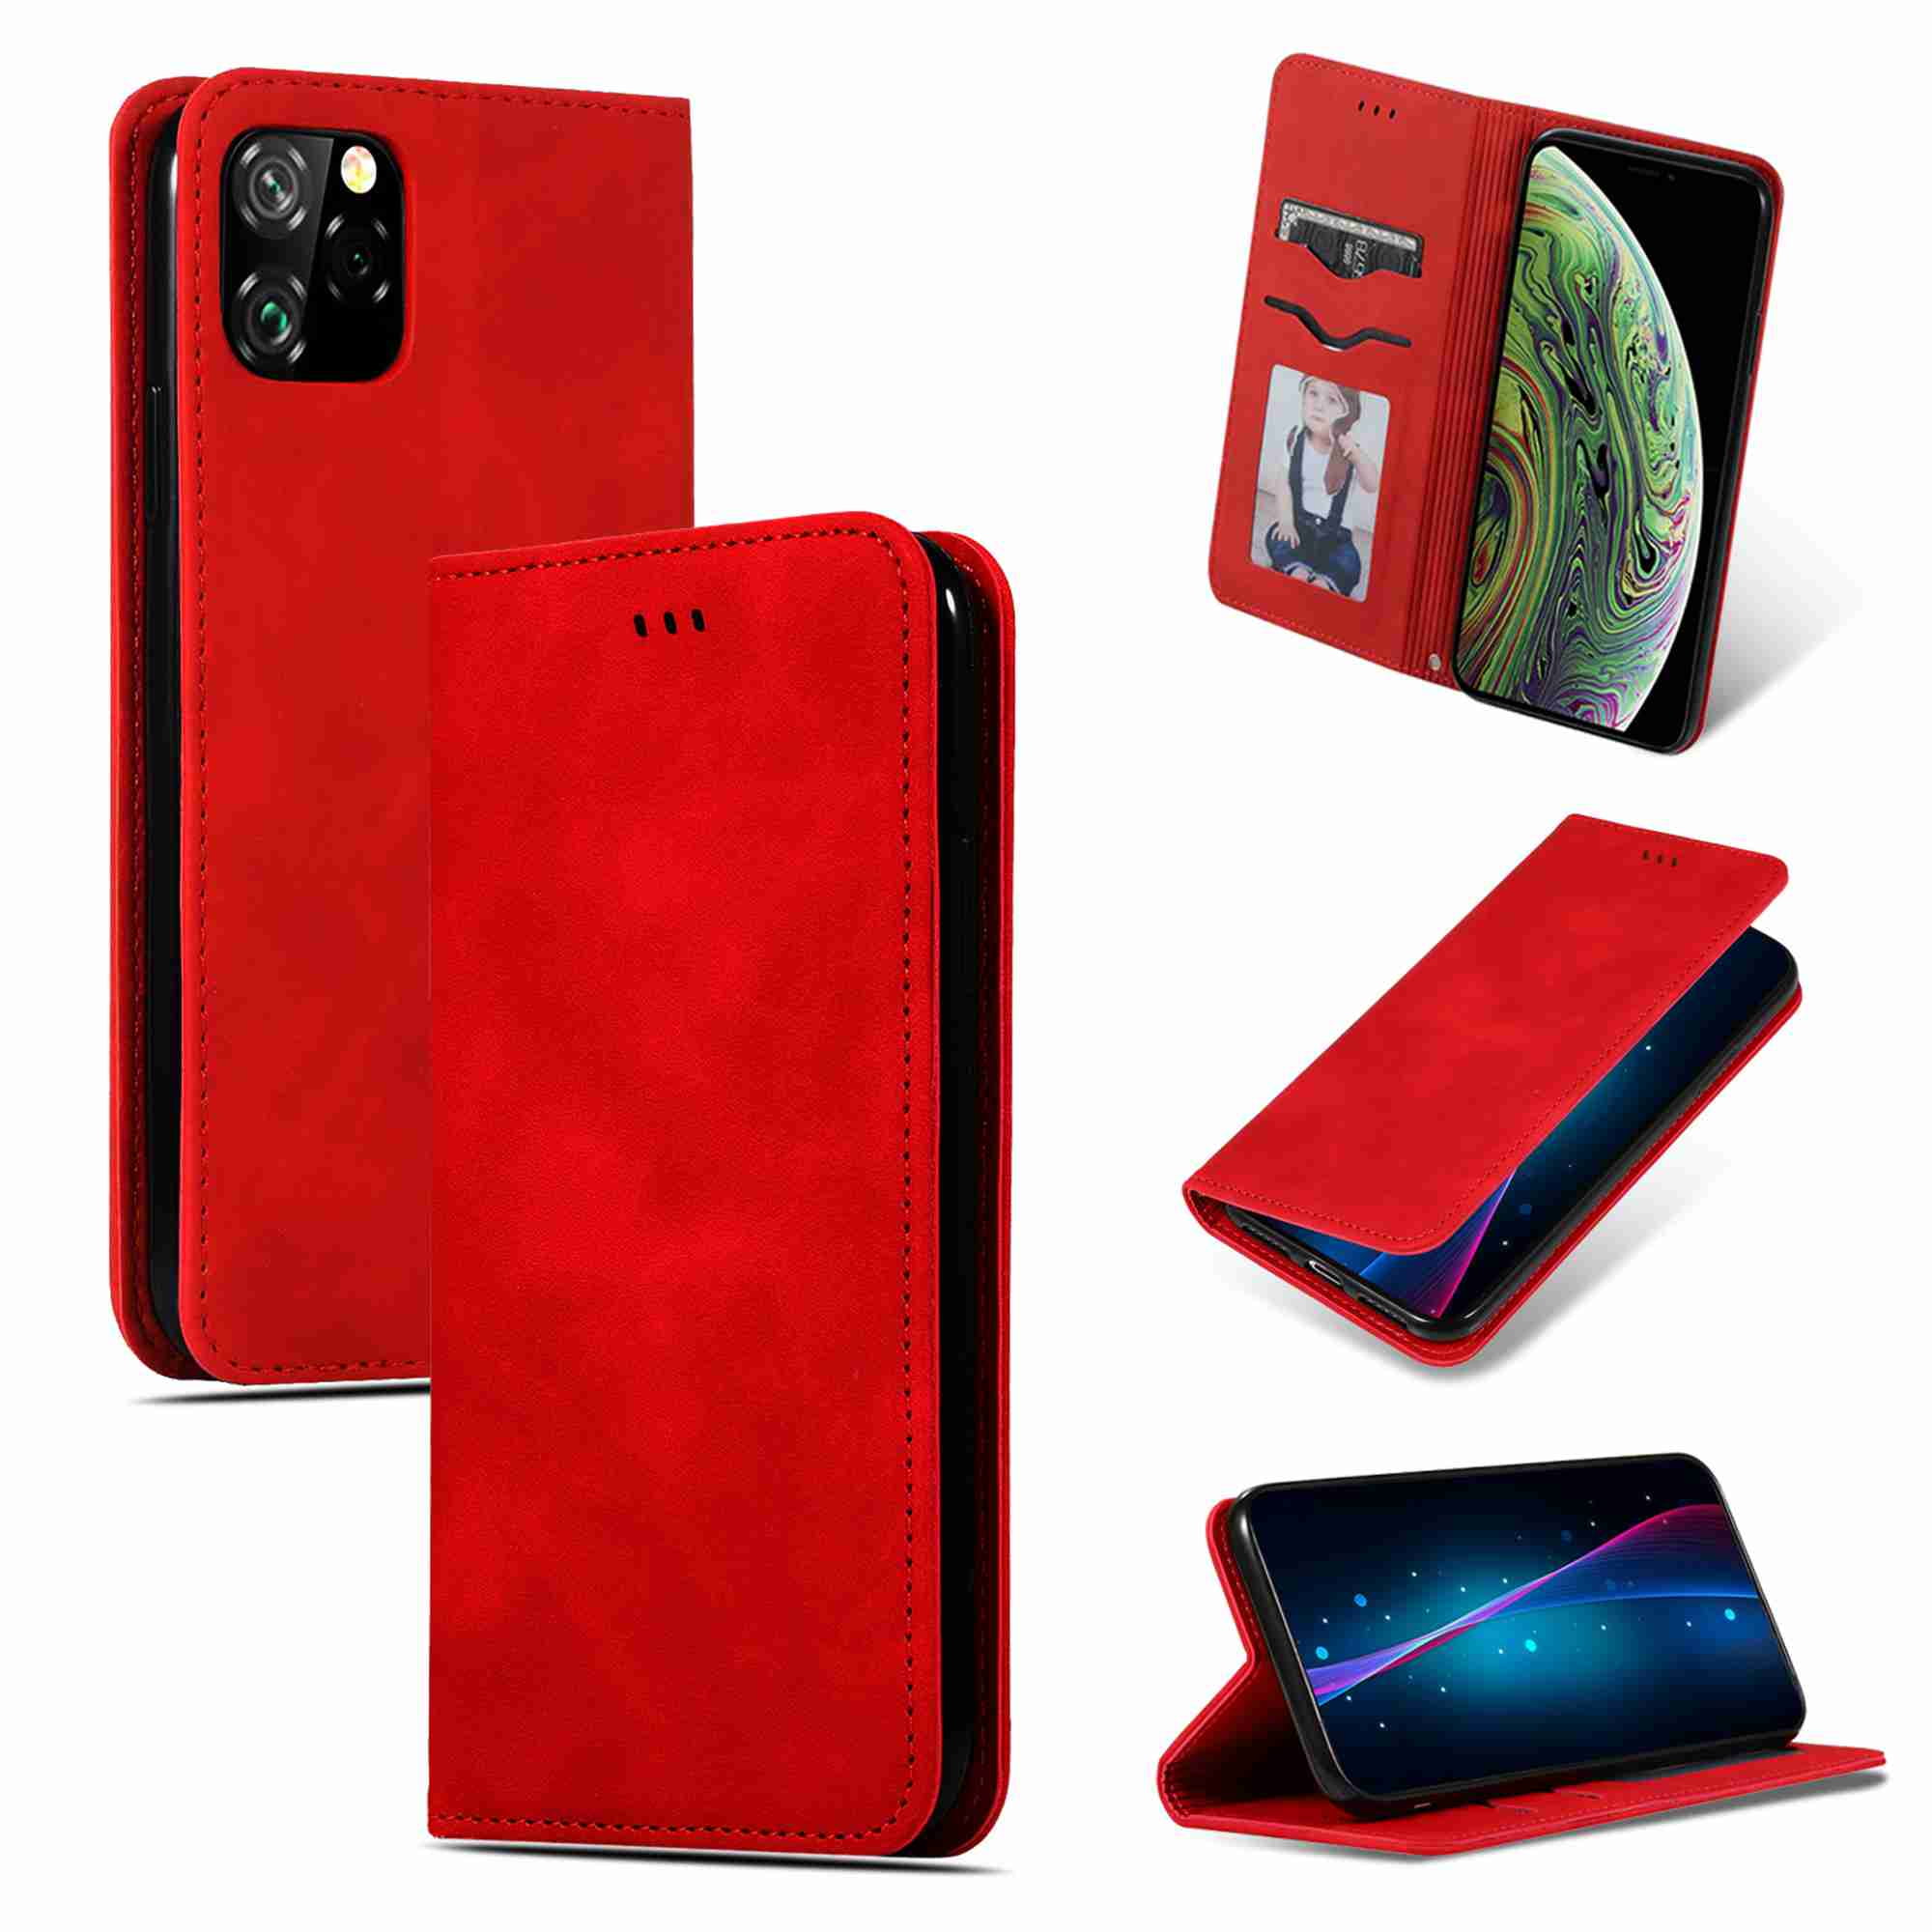 iPhone 11 Pro Flip Case Cover for Leather Kickstand Card Holders Extra-Protective Business Cell Phone Cover Flip Cover 